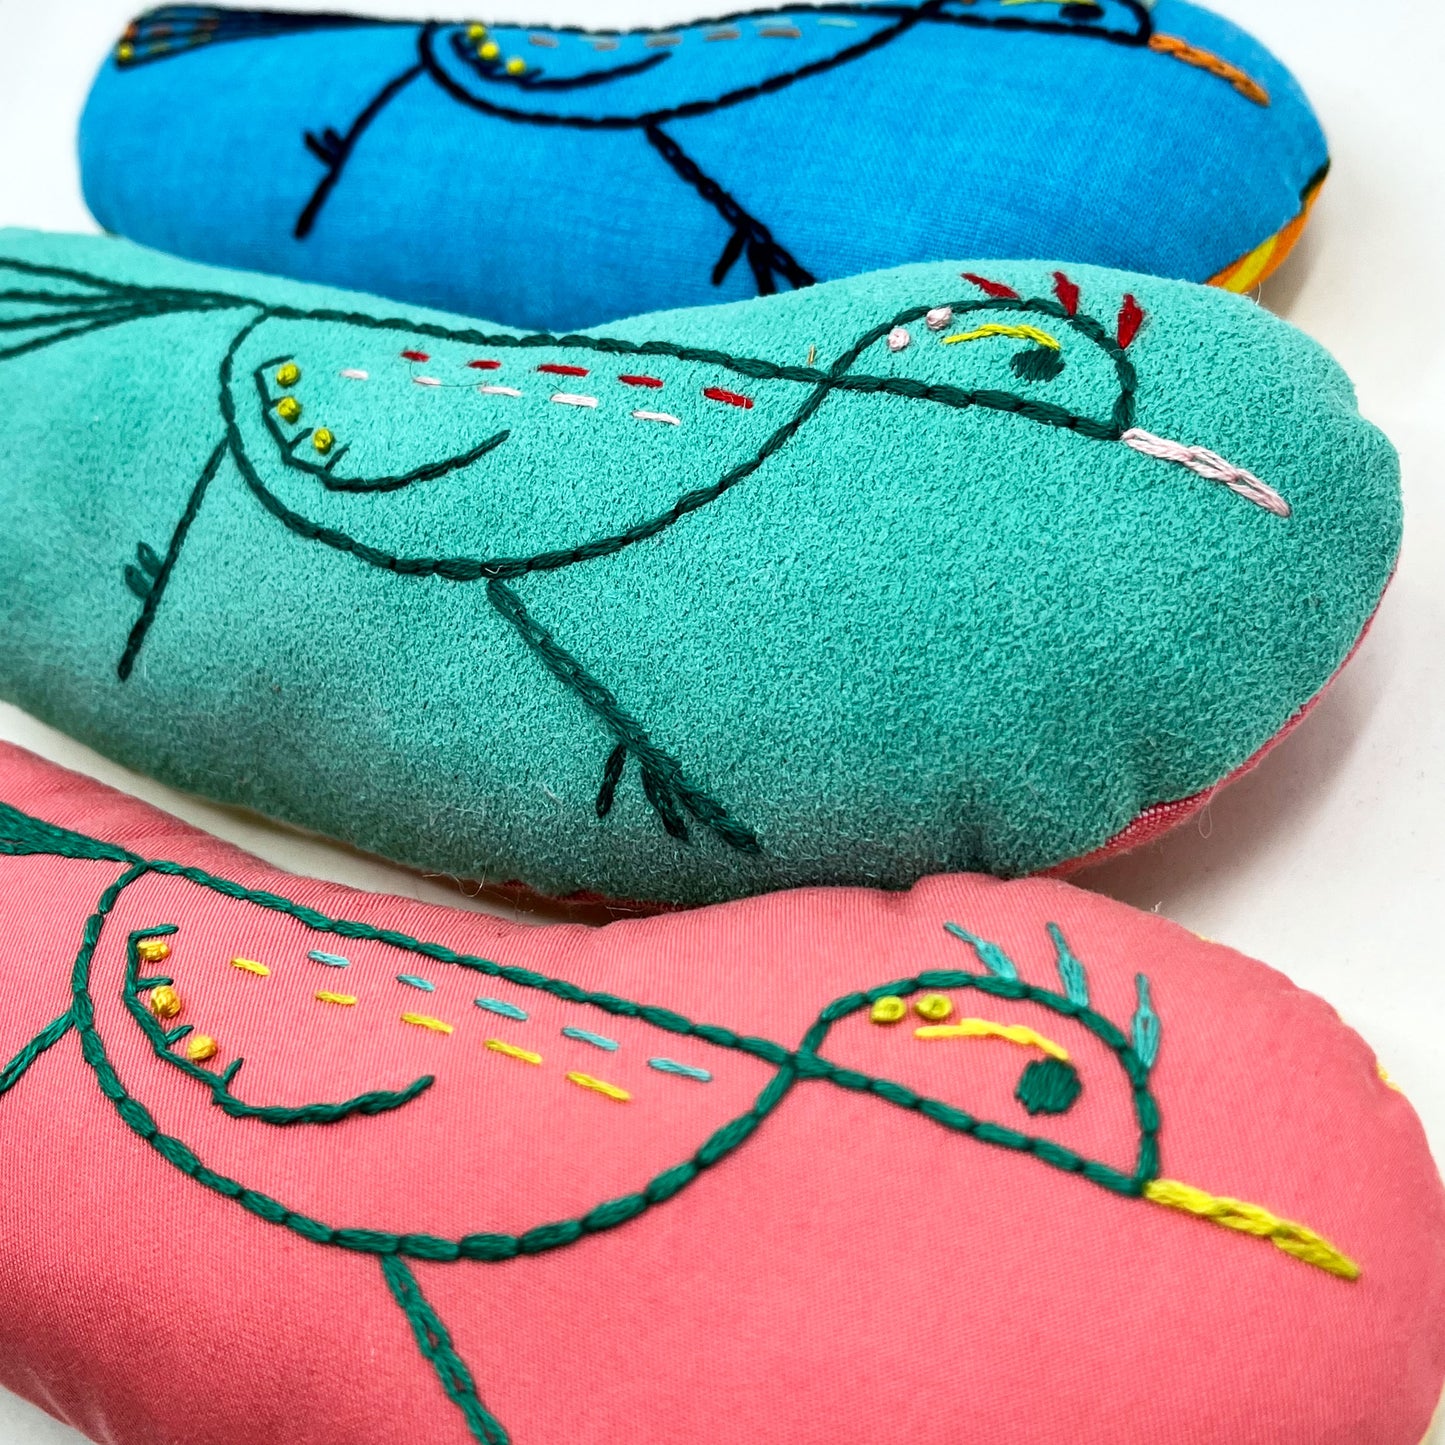 close up angled view of a group of colorfully hand embroidered roadrunner stuffed animal pillows in blue, seafoam green and coral fabric, in a pile on a white background